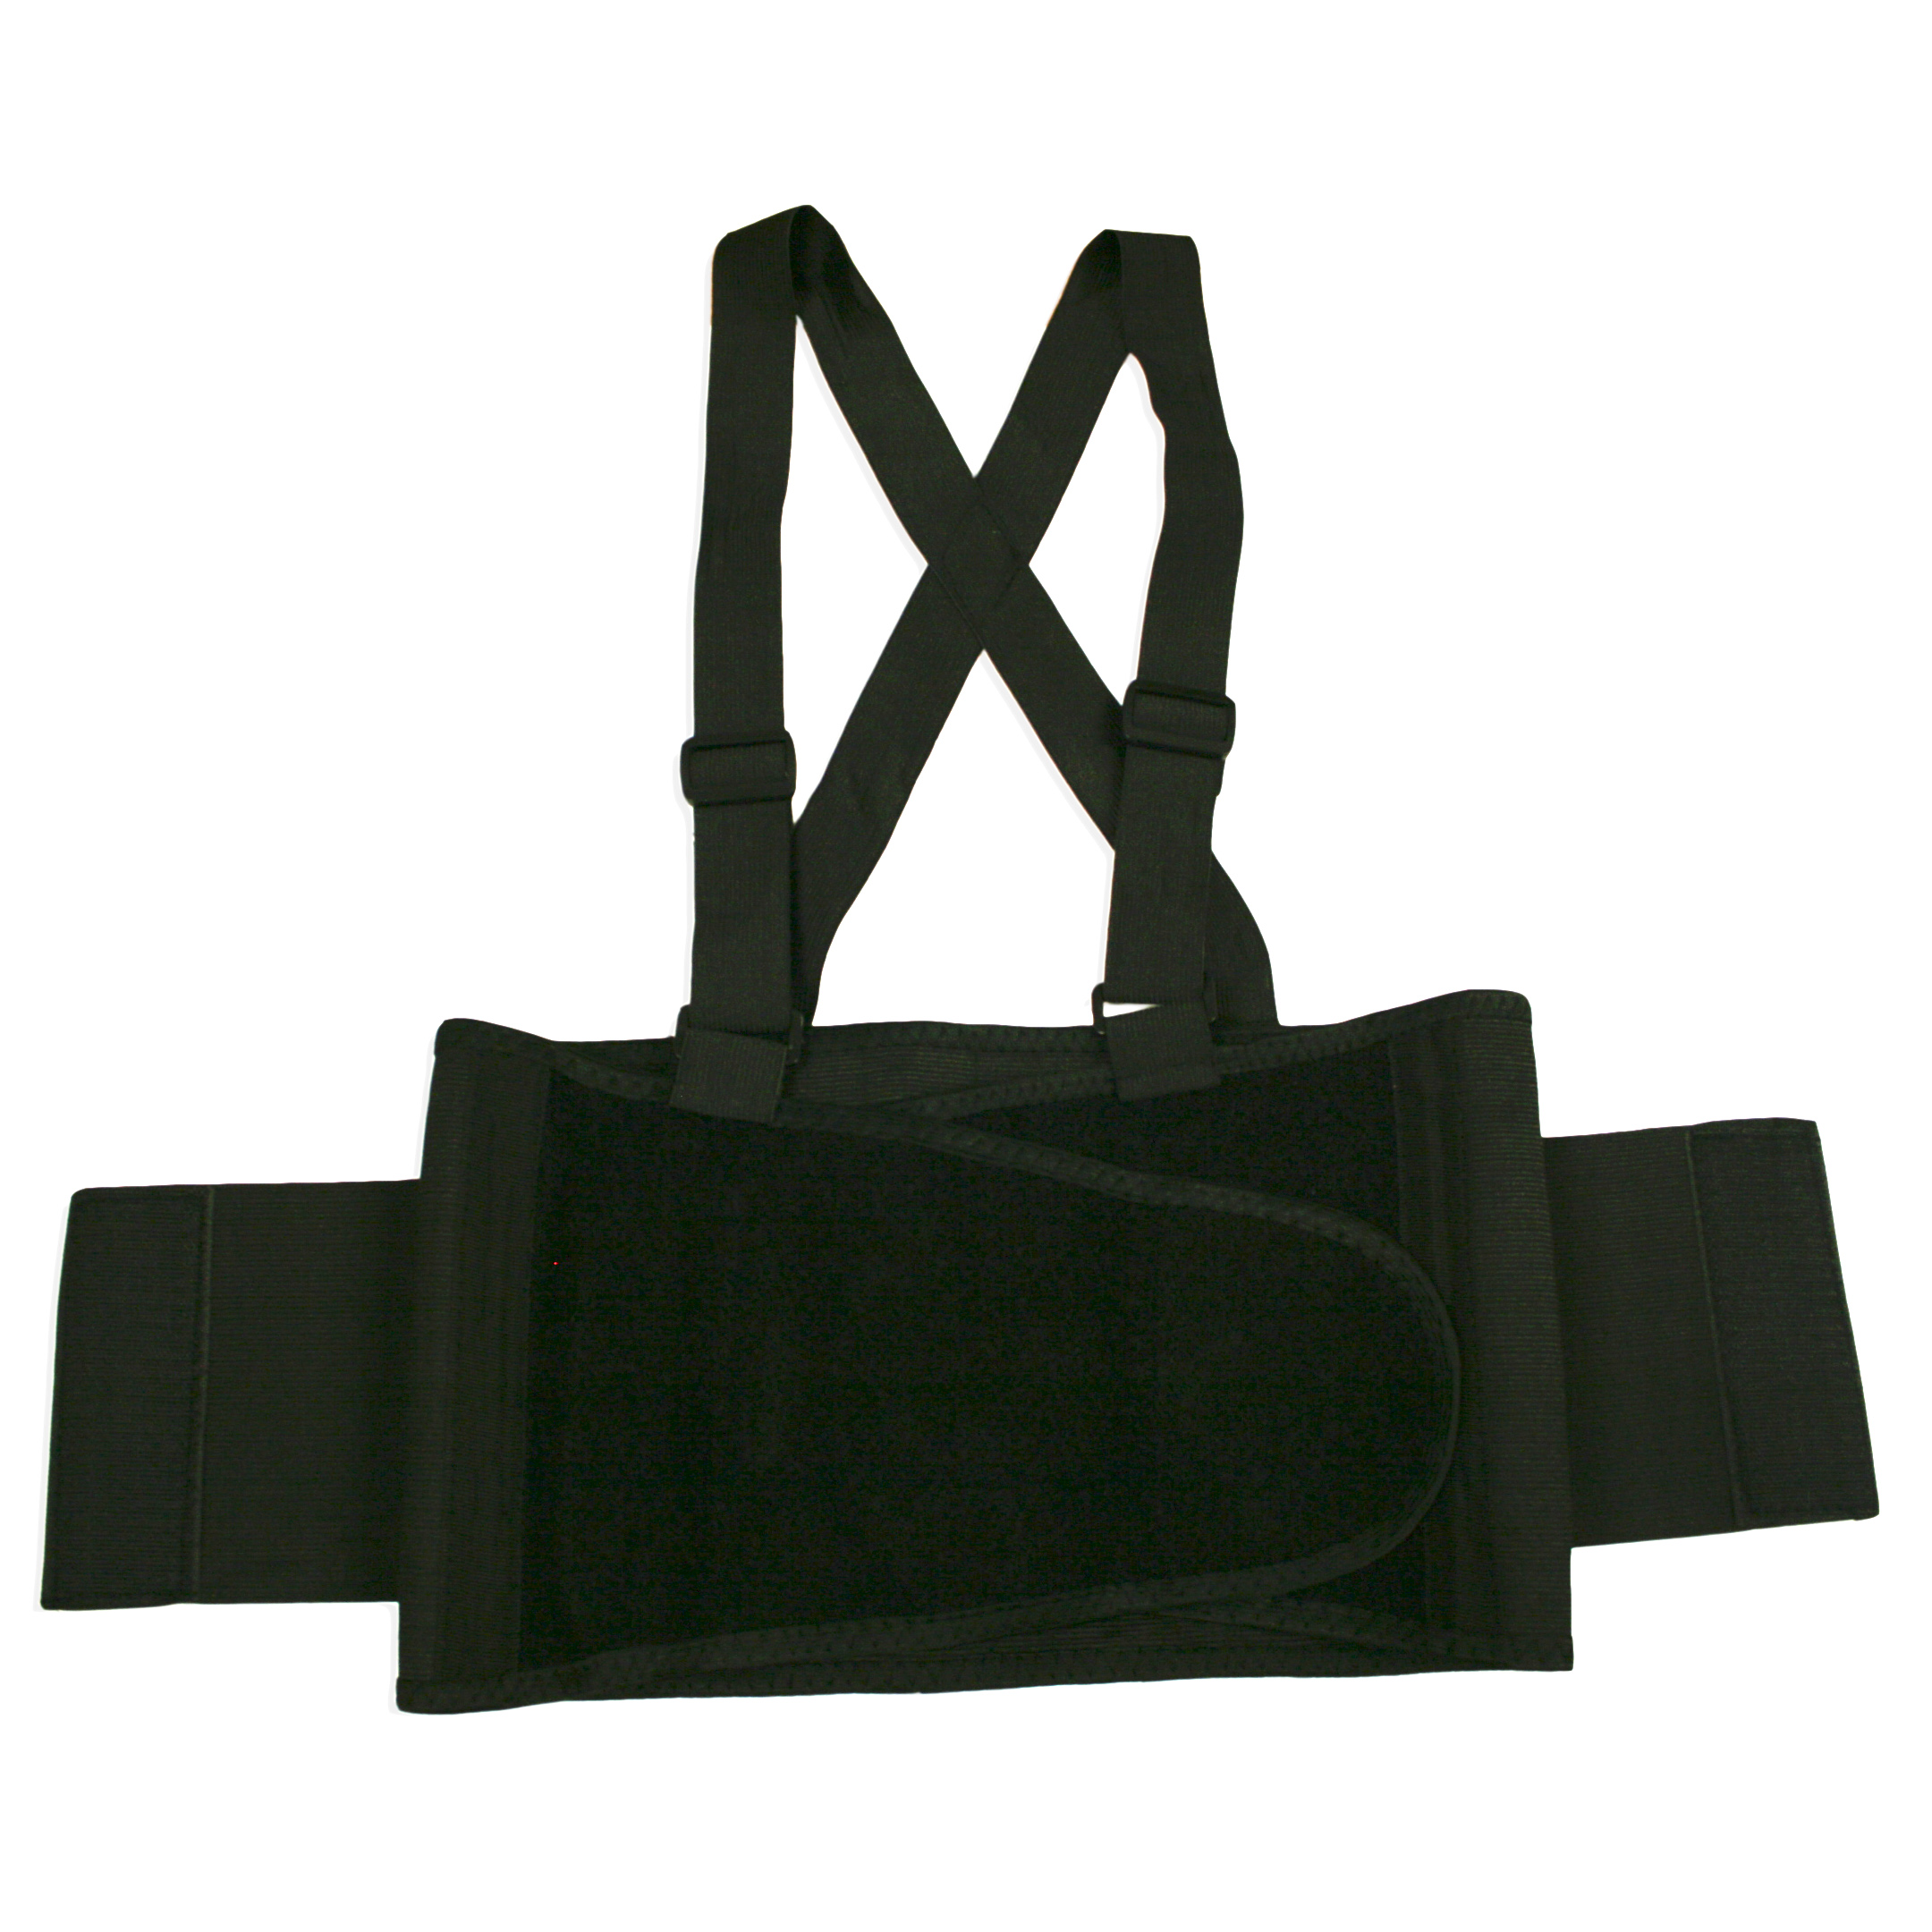 Medium Back Support,Attached
Suspenders